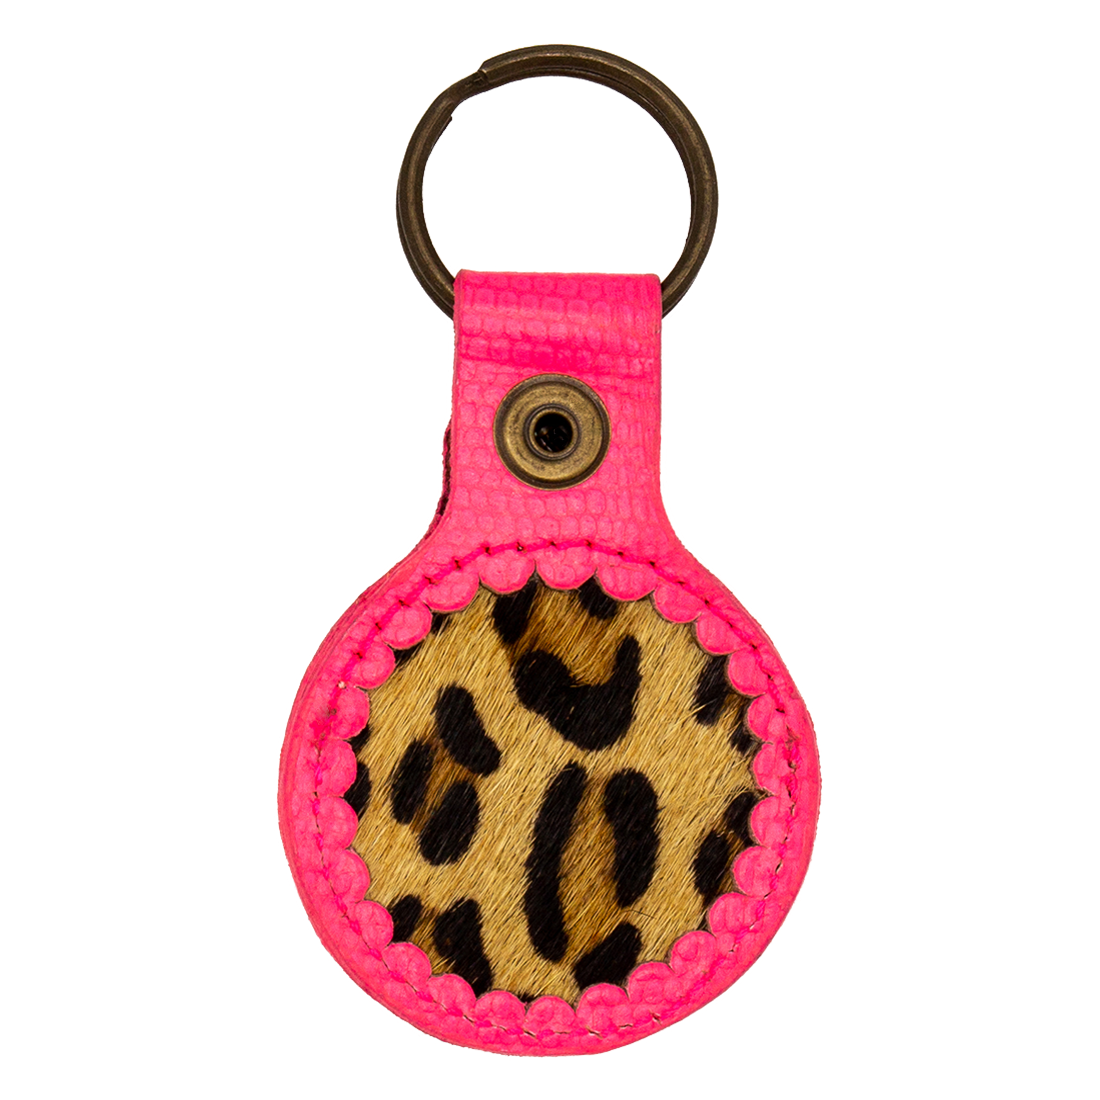 DWAM - Dog with a Mission AIR TAG HOLDER PINK